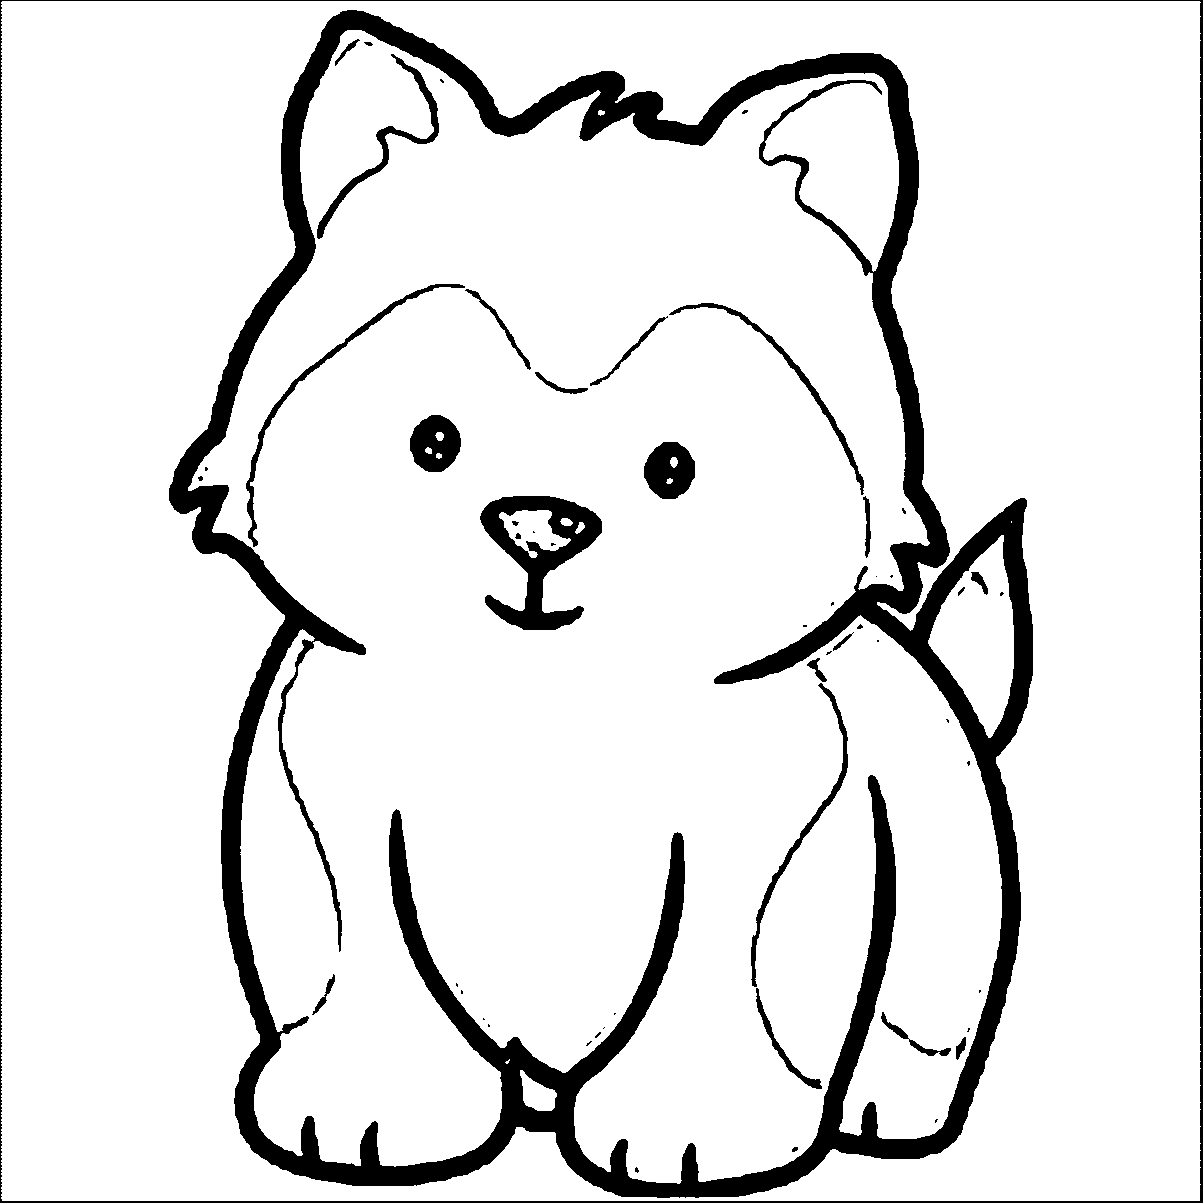 Siberian Husky Coloring Pages - Coloring Home